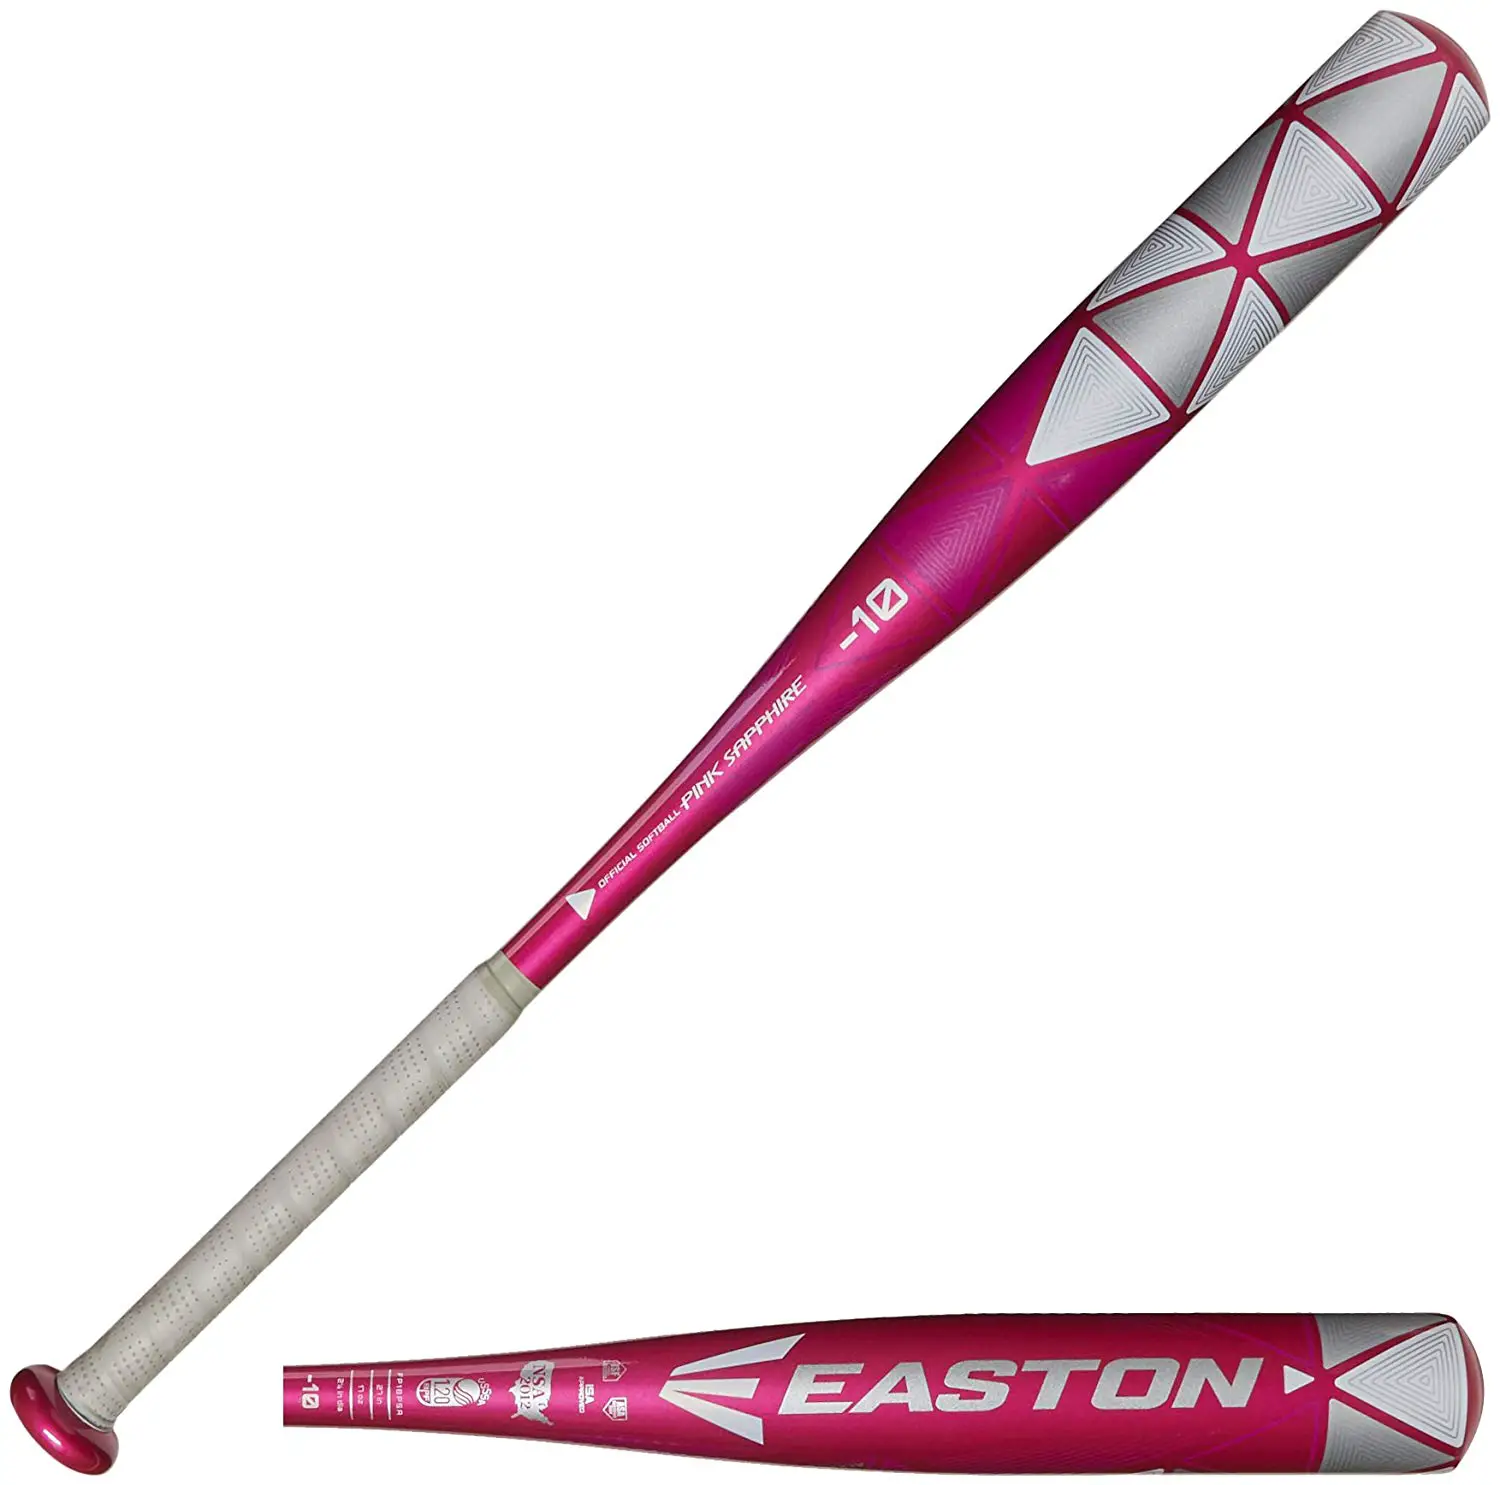 EASTON Pink Sapphire -10 Girls & Youth Fastpitch Softball Bat for 6 years old